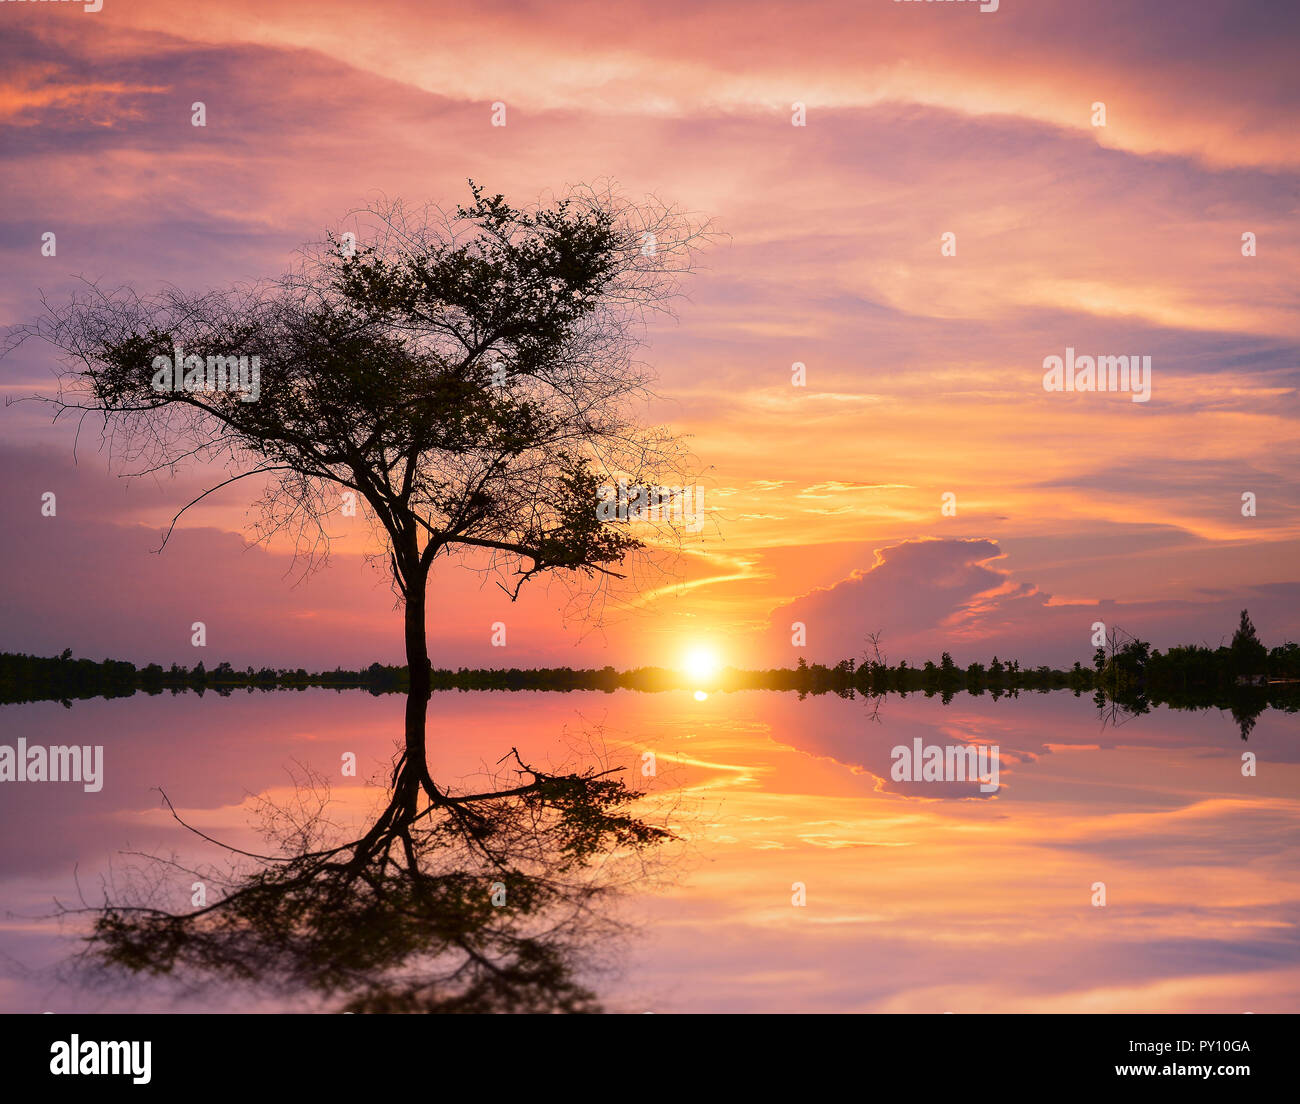 Rural landscape reflections at sunset, Thailand Stock Photo